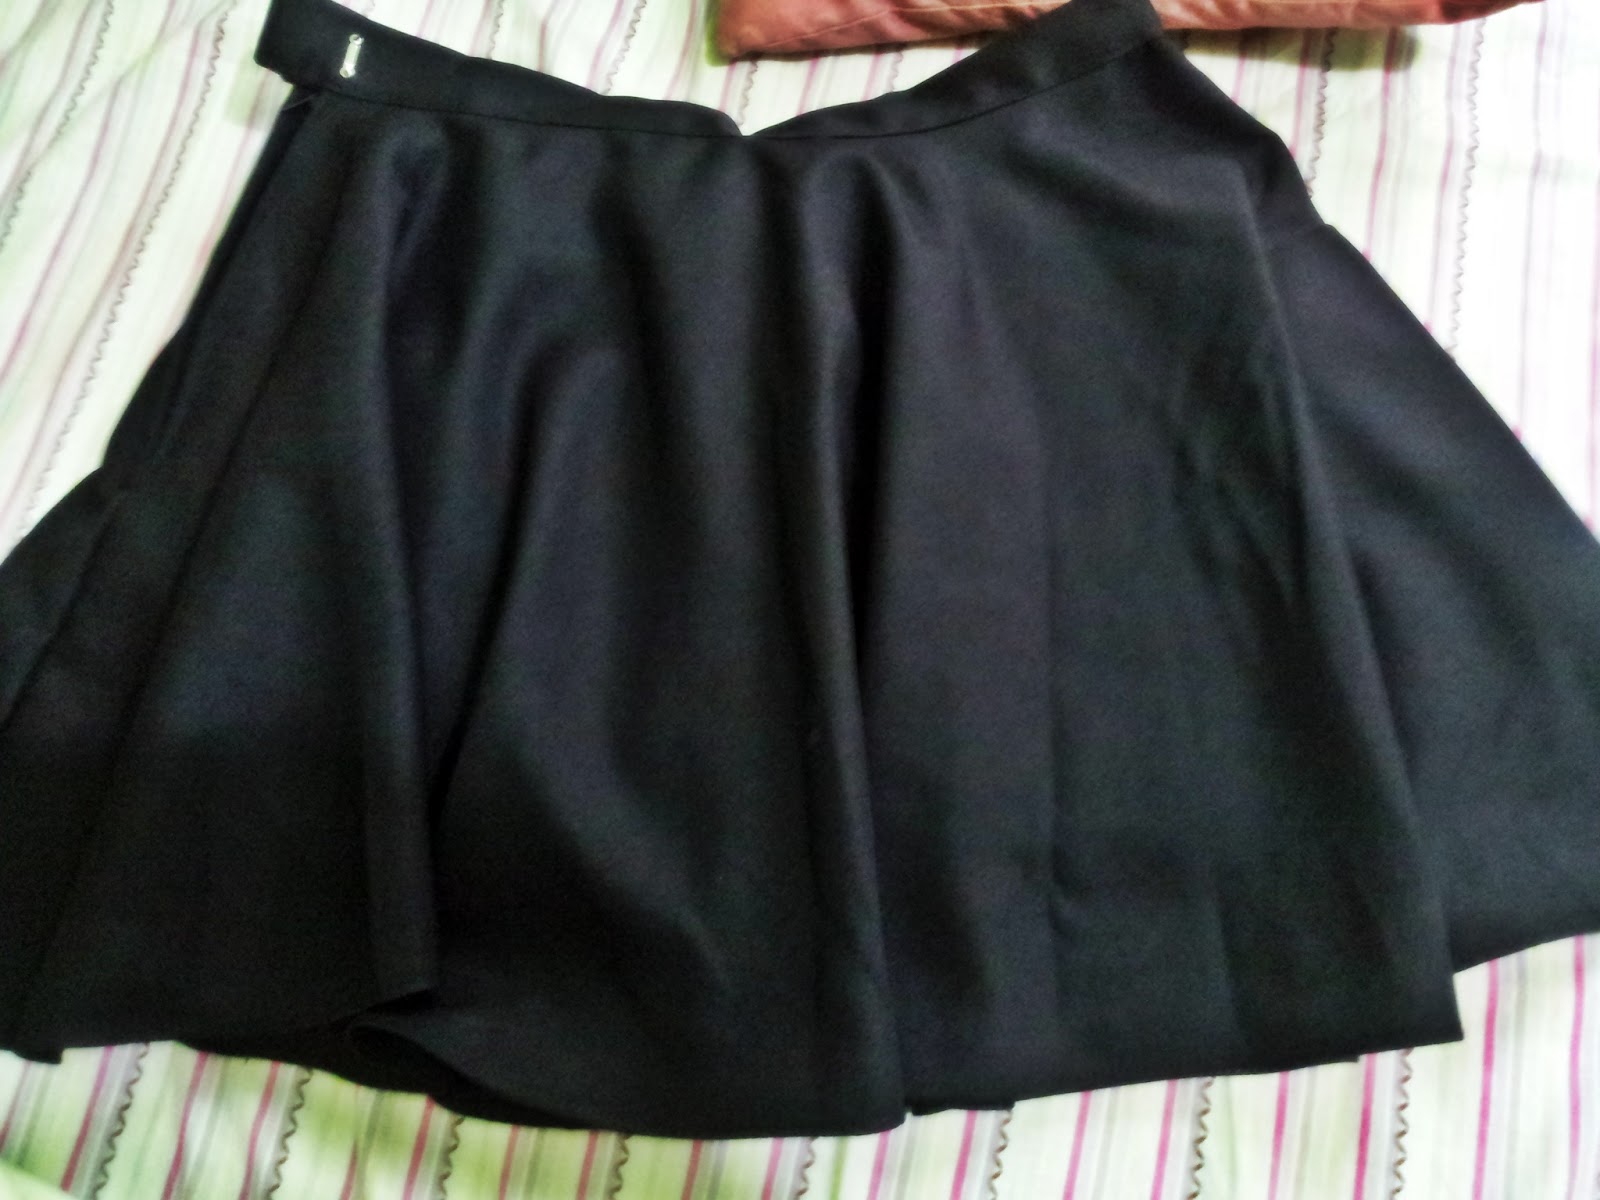 How to Wear Them Skater Skirts - Love and in Between♥